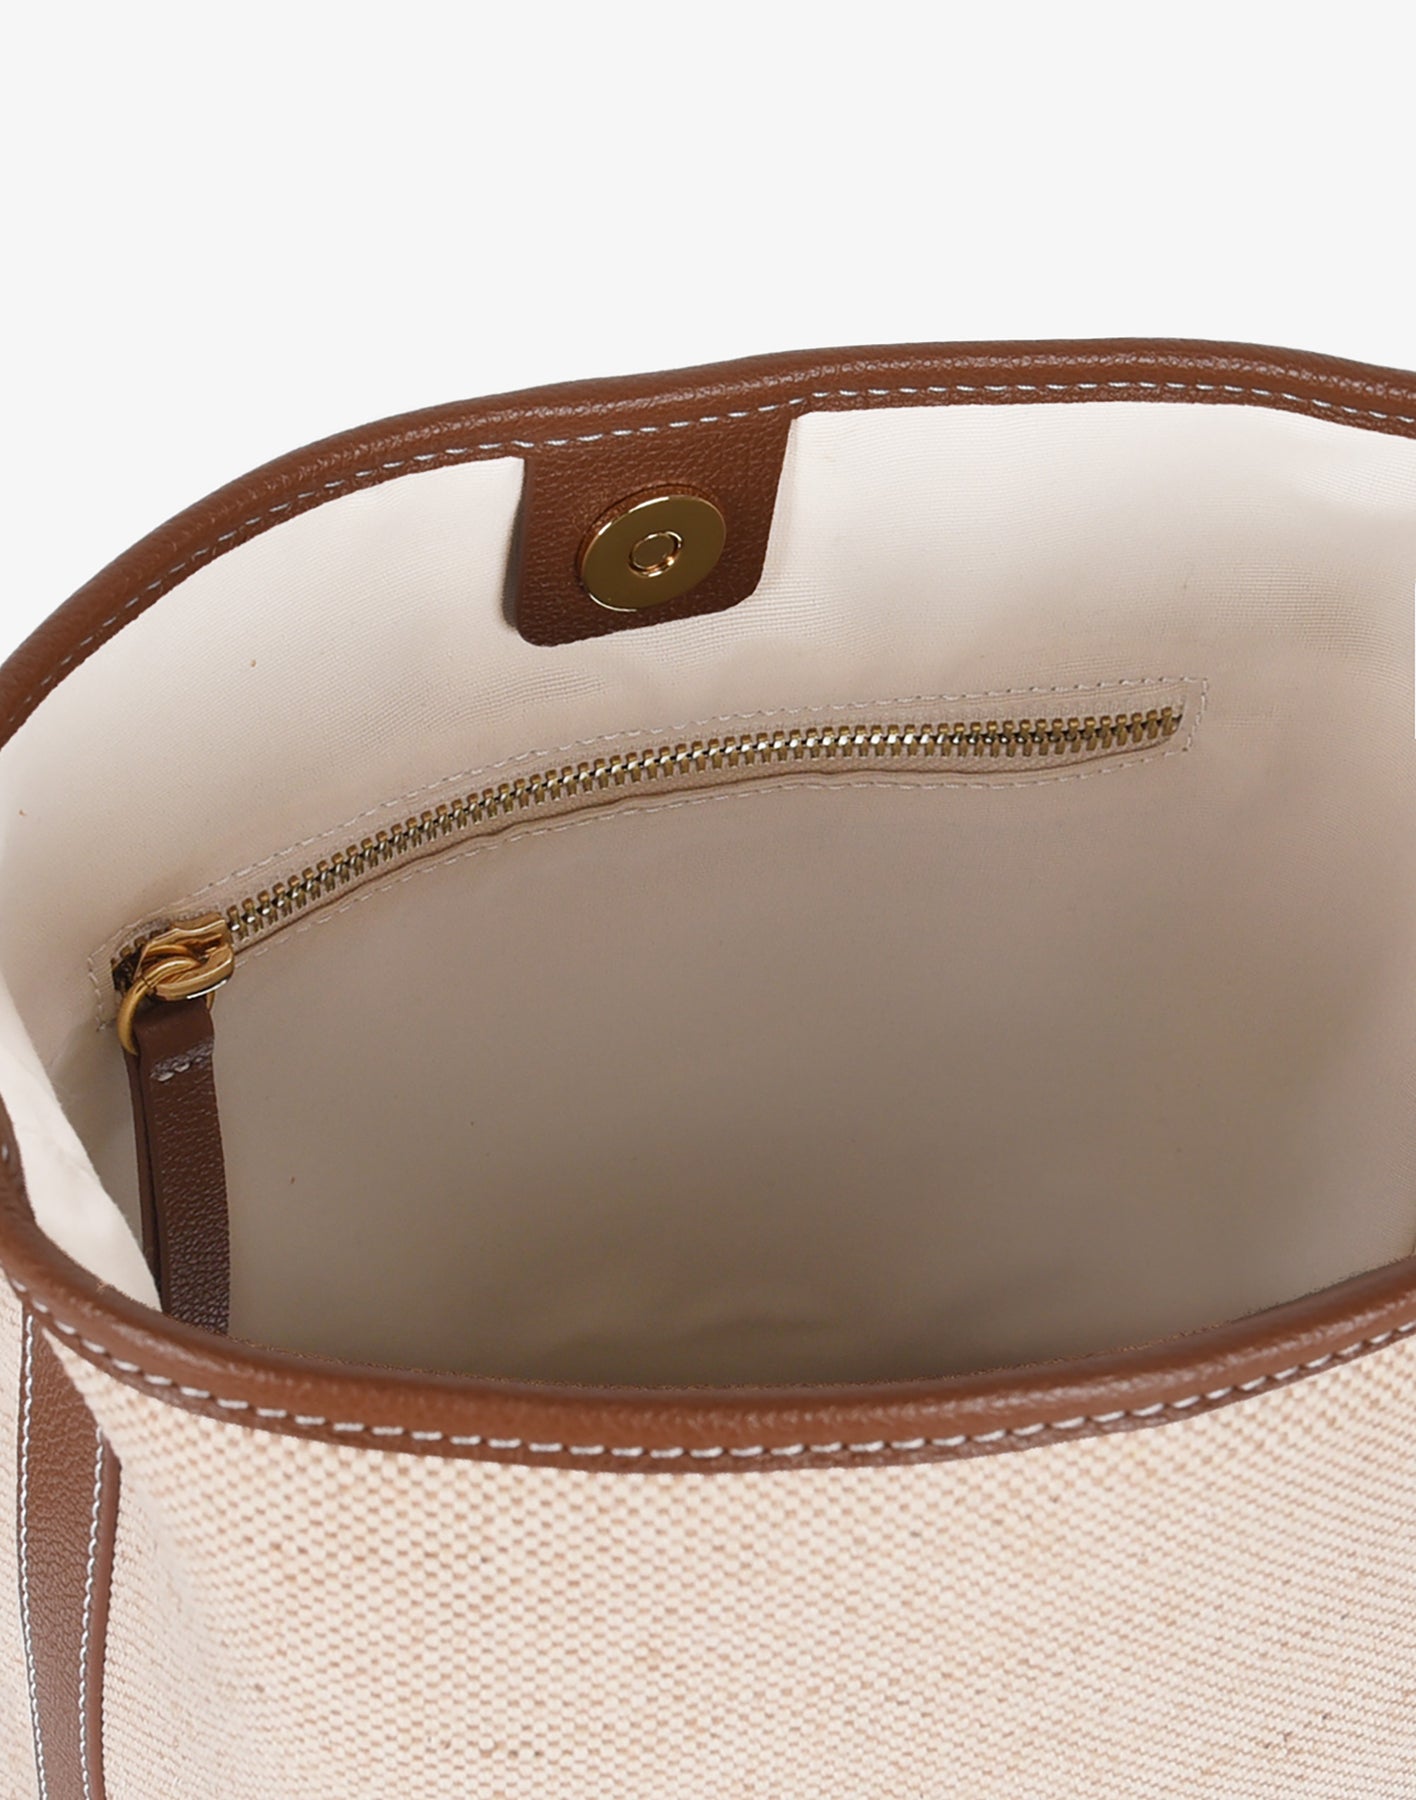 Caramel Cowhide Leather Lili Bucket Bag - Handcrafted Convertible